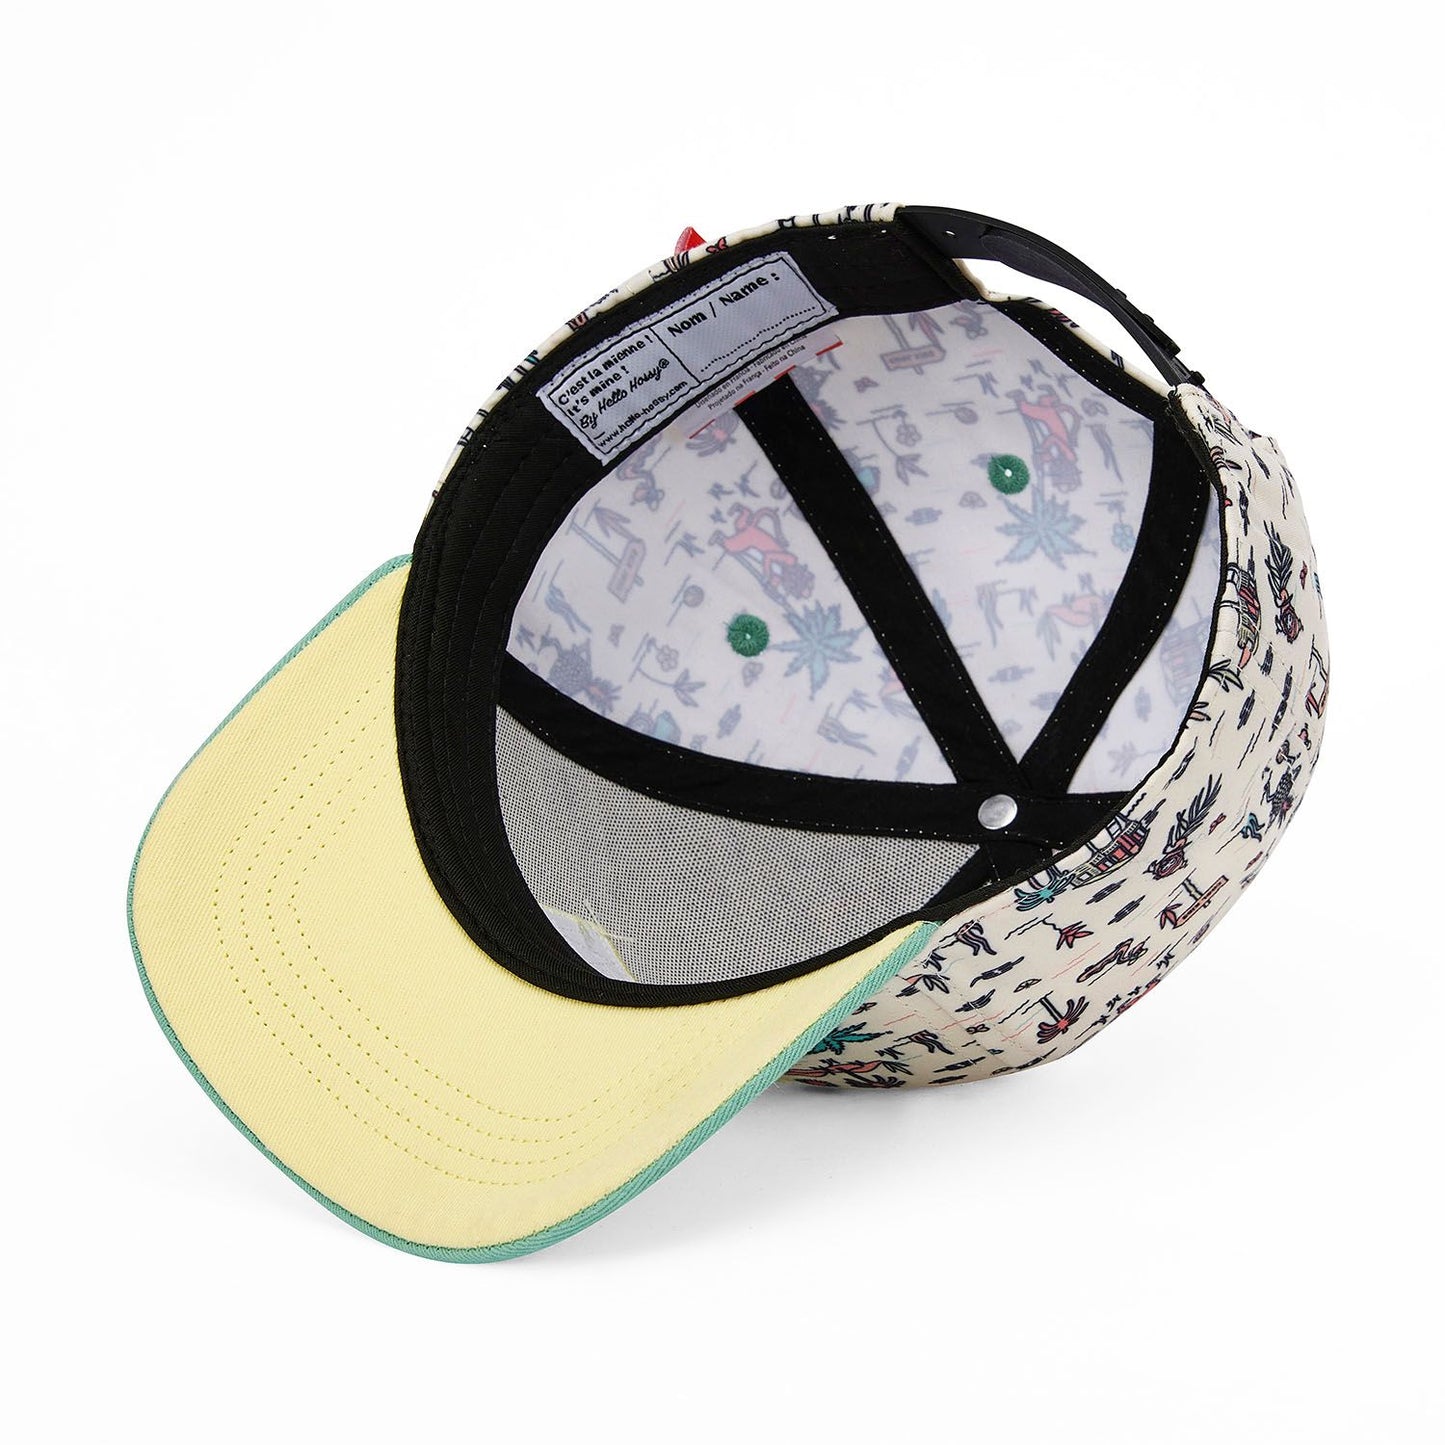 Casquette Jungly 2-5 ans - Cool kids Only - Hello Hossy